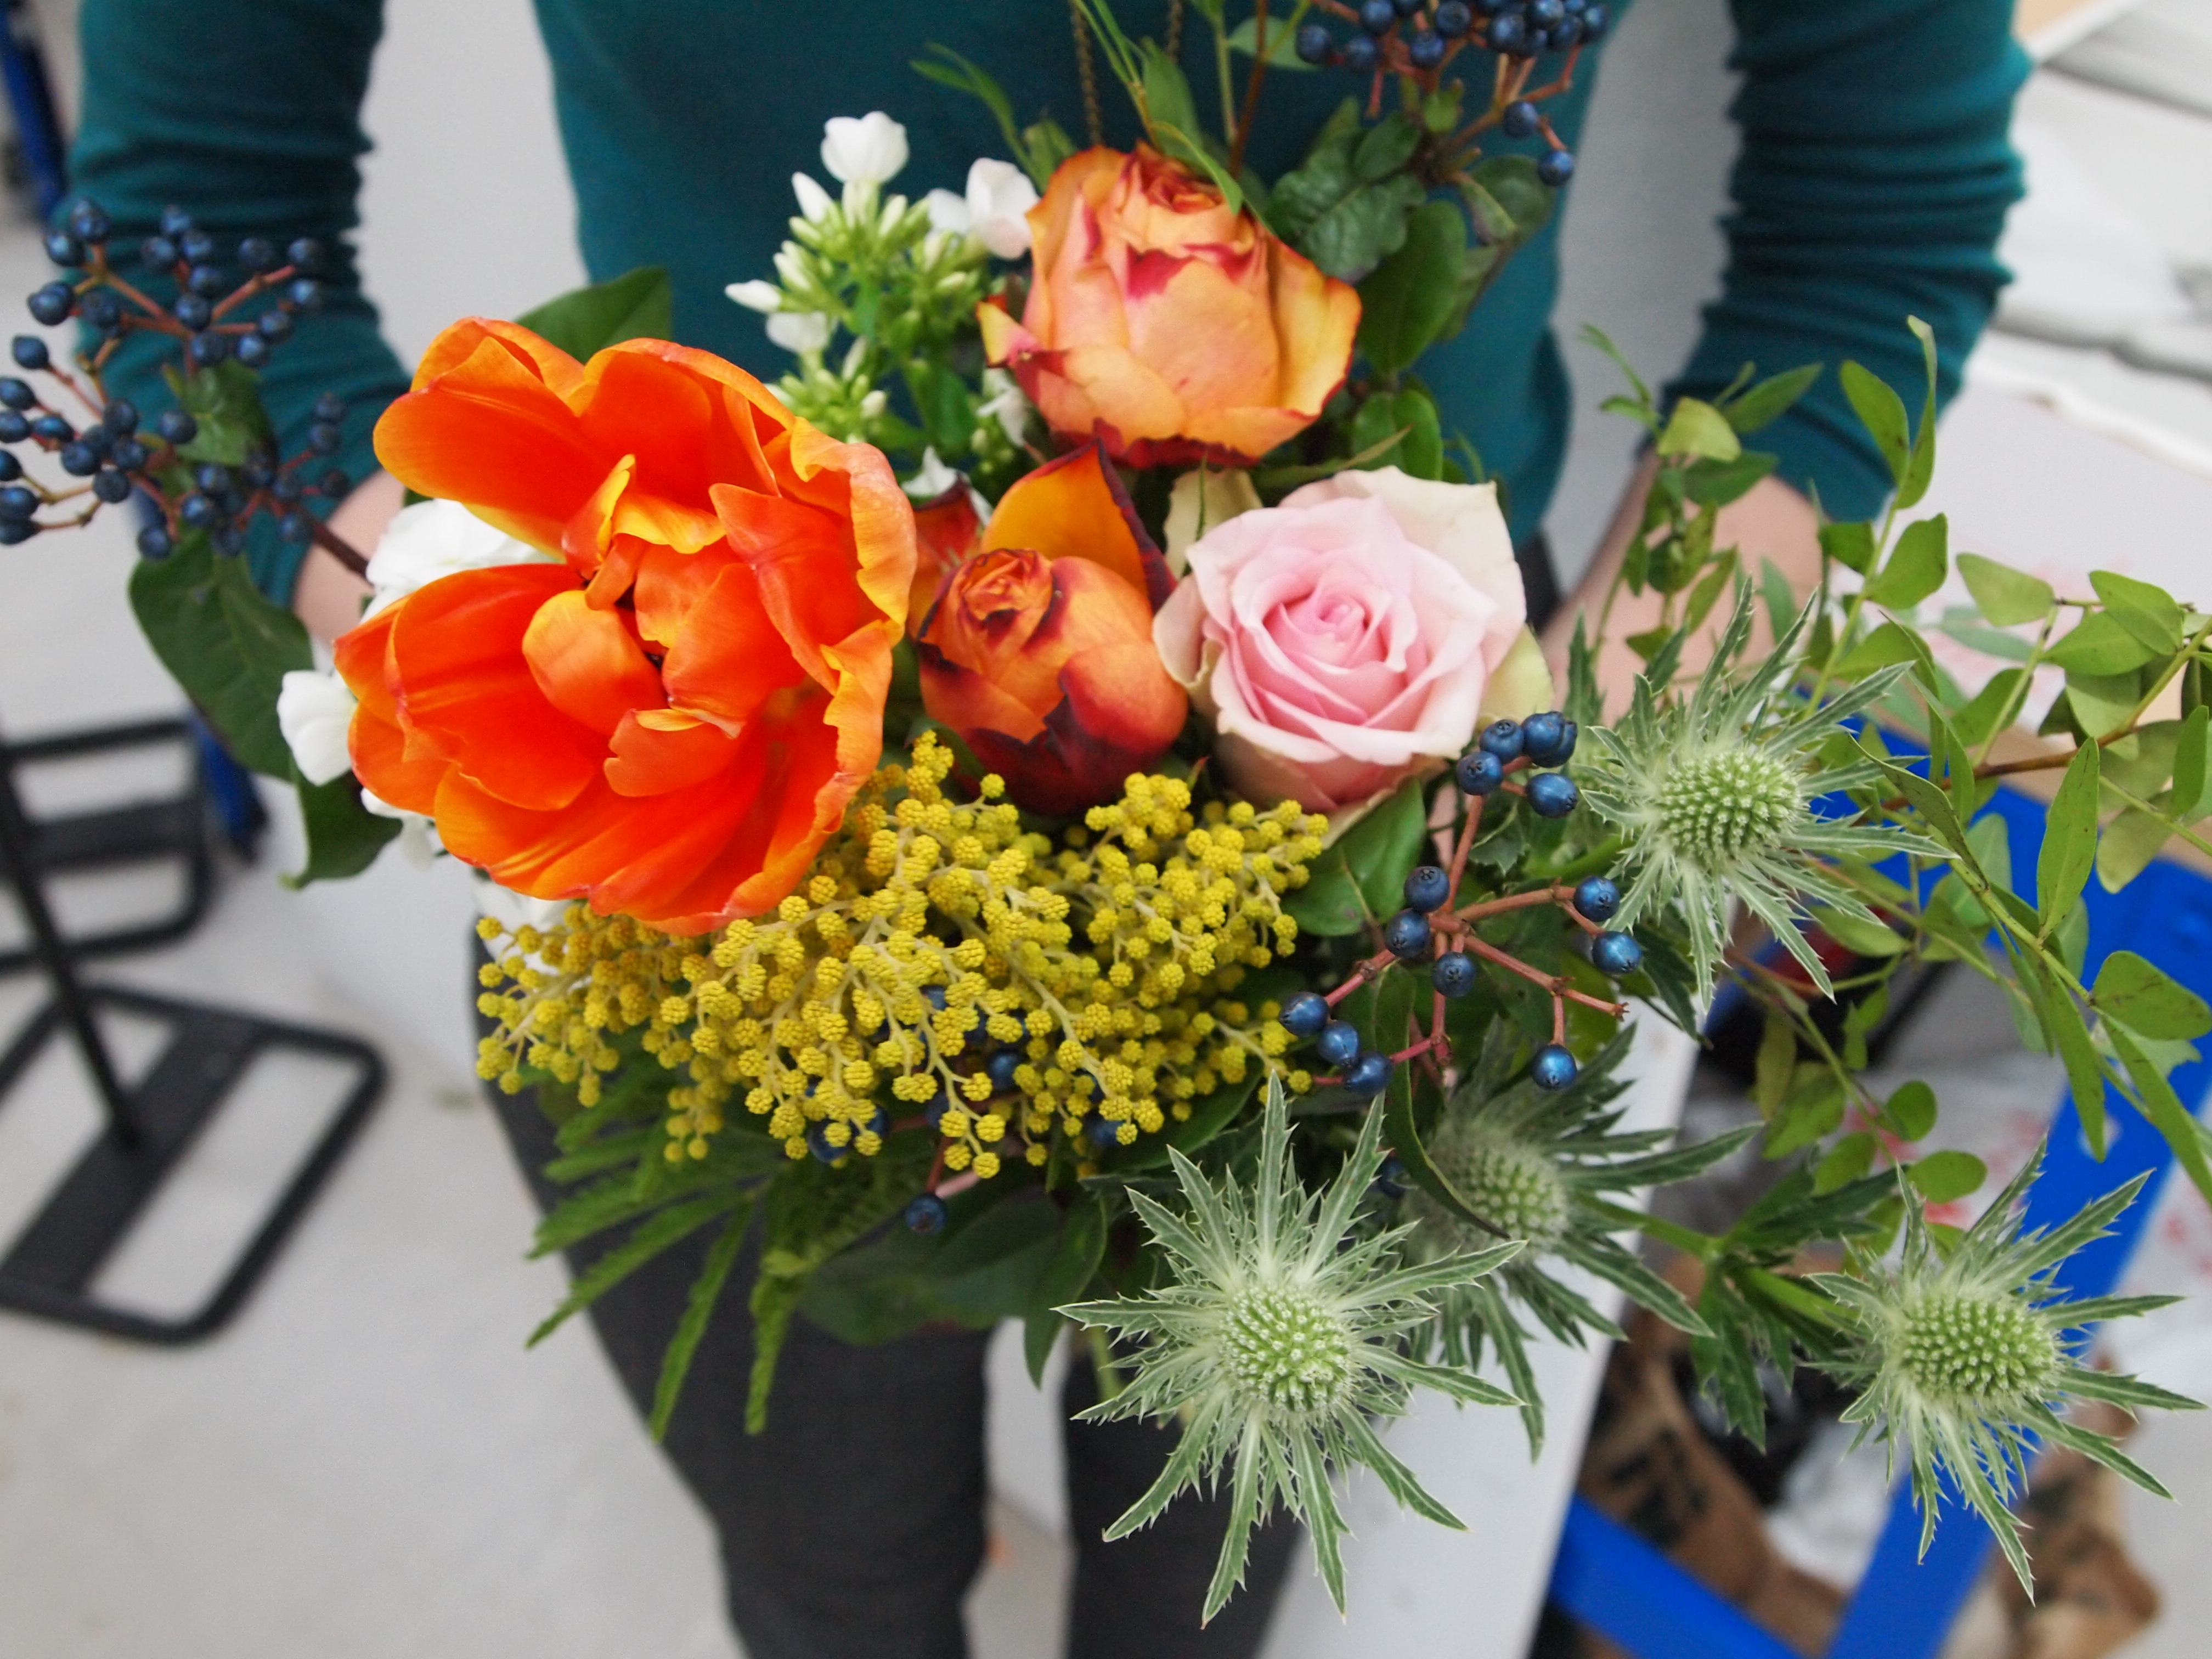 I bought this beautiful orange bouquet from a sweet florist in Bath, Green park station